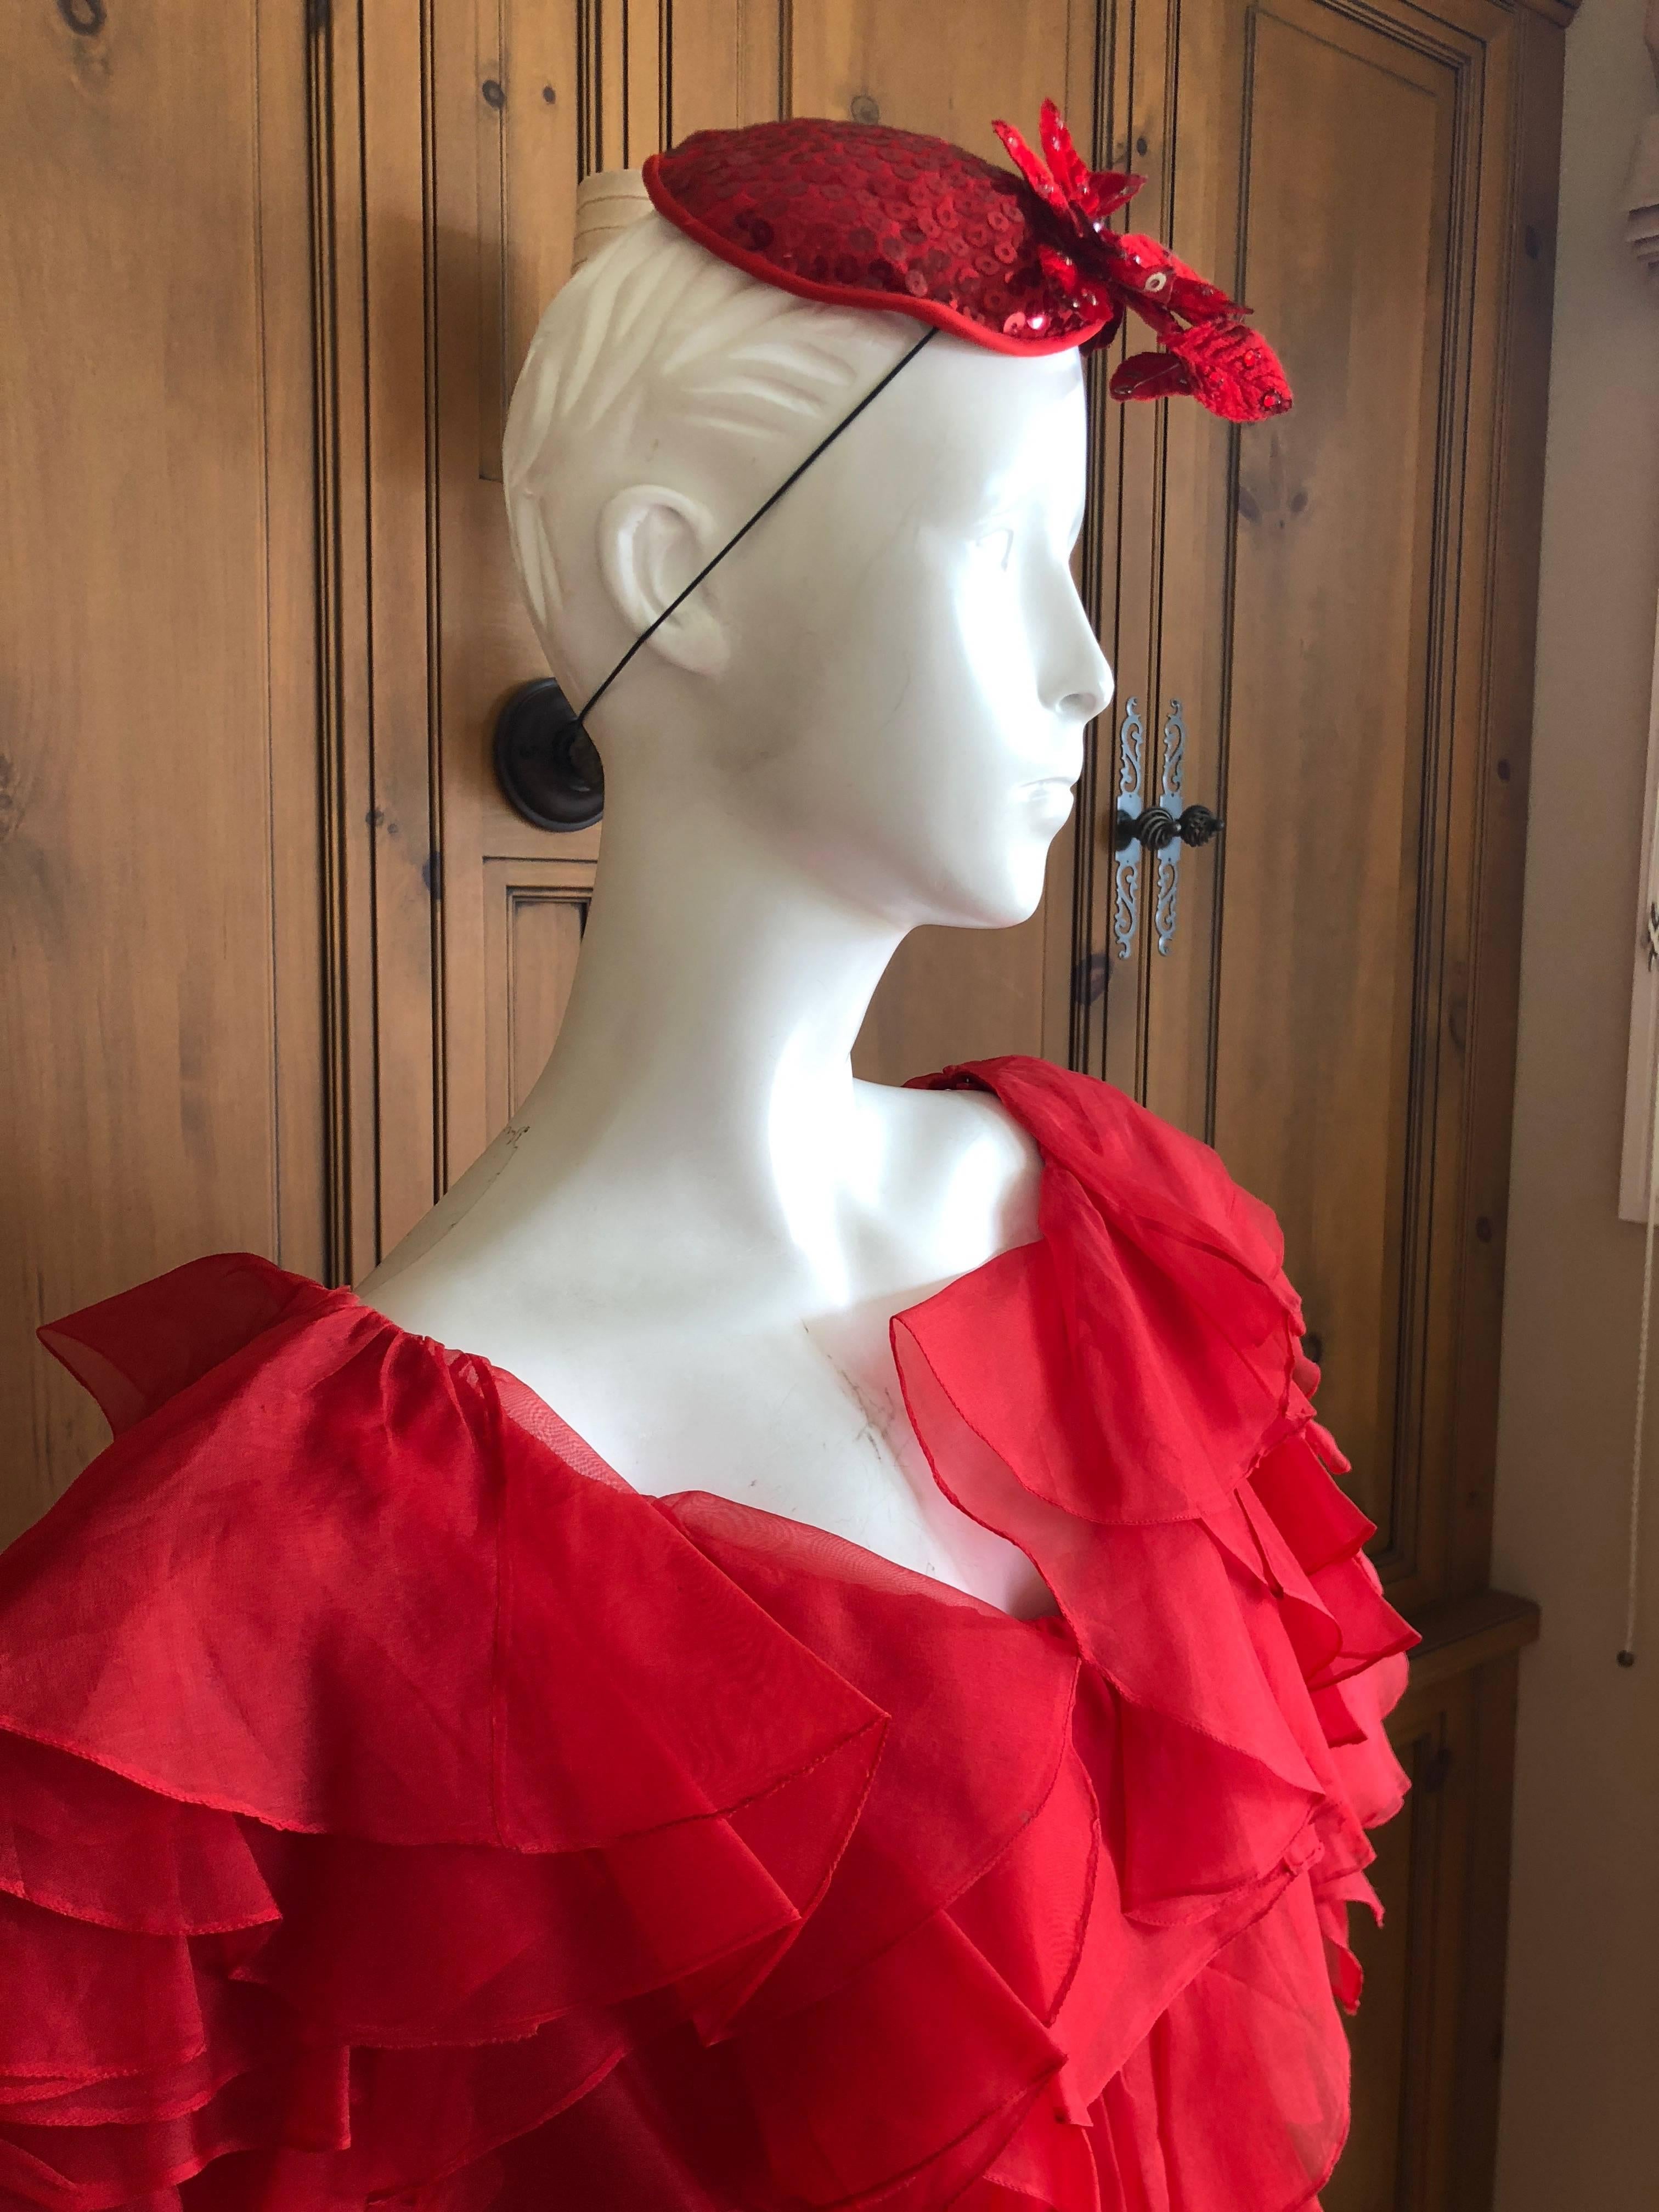 Women's Cardinali 1970s Scarlet Red Ruffled Top and Bias Cut Silk Skirt with Fascinator For Sale